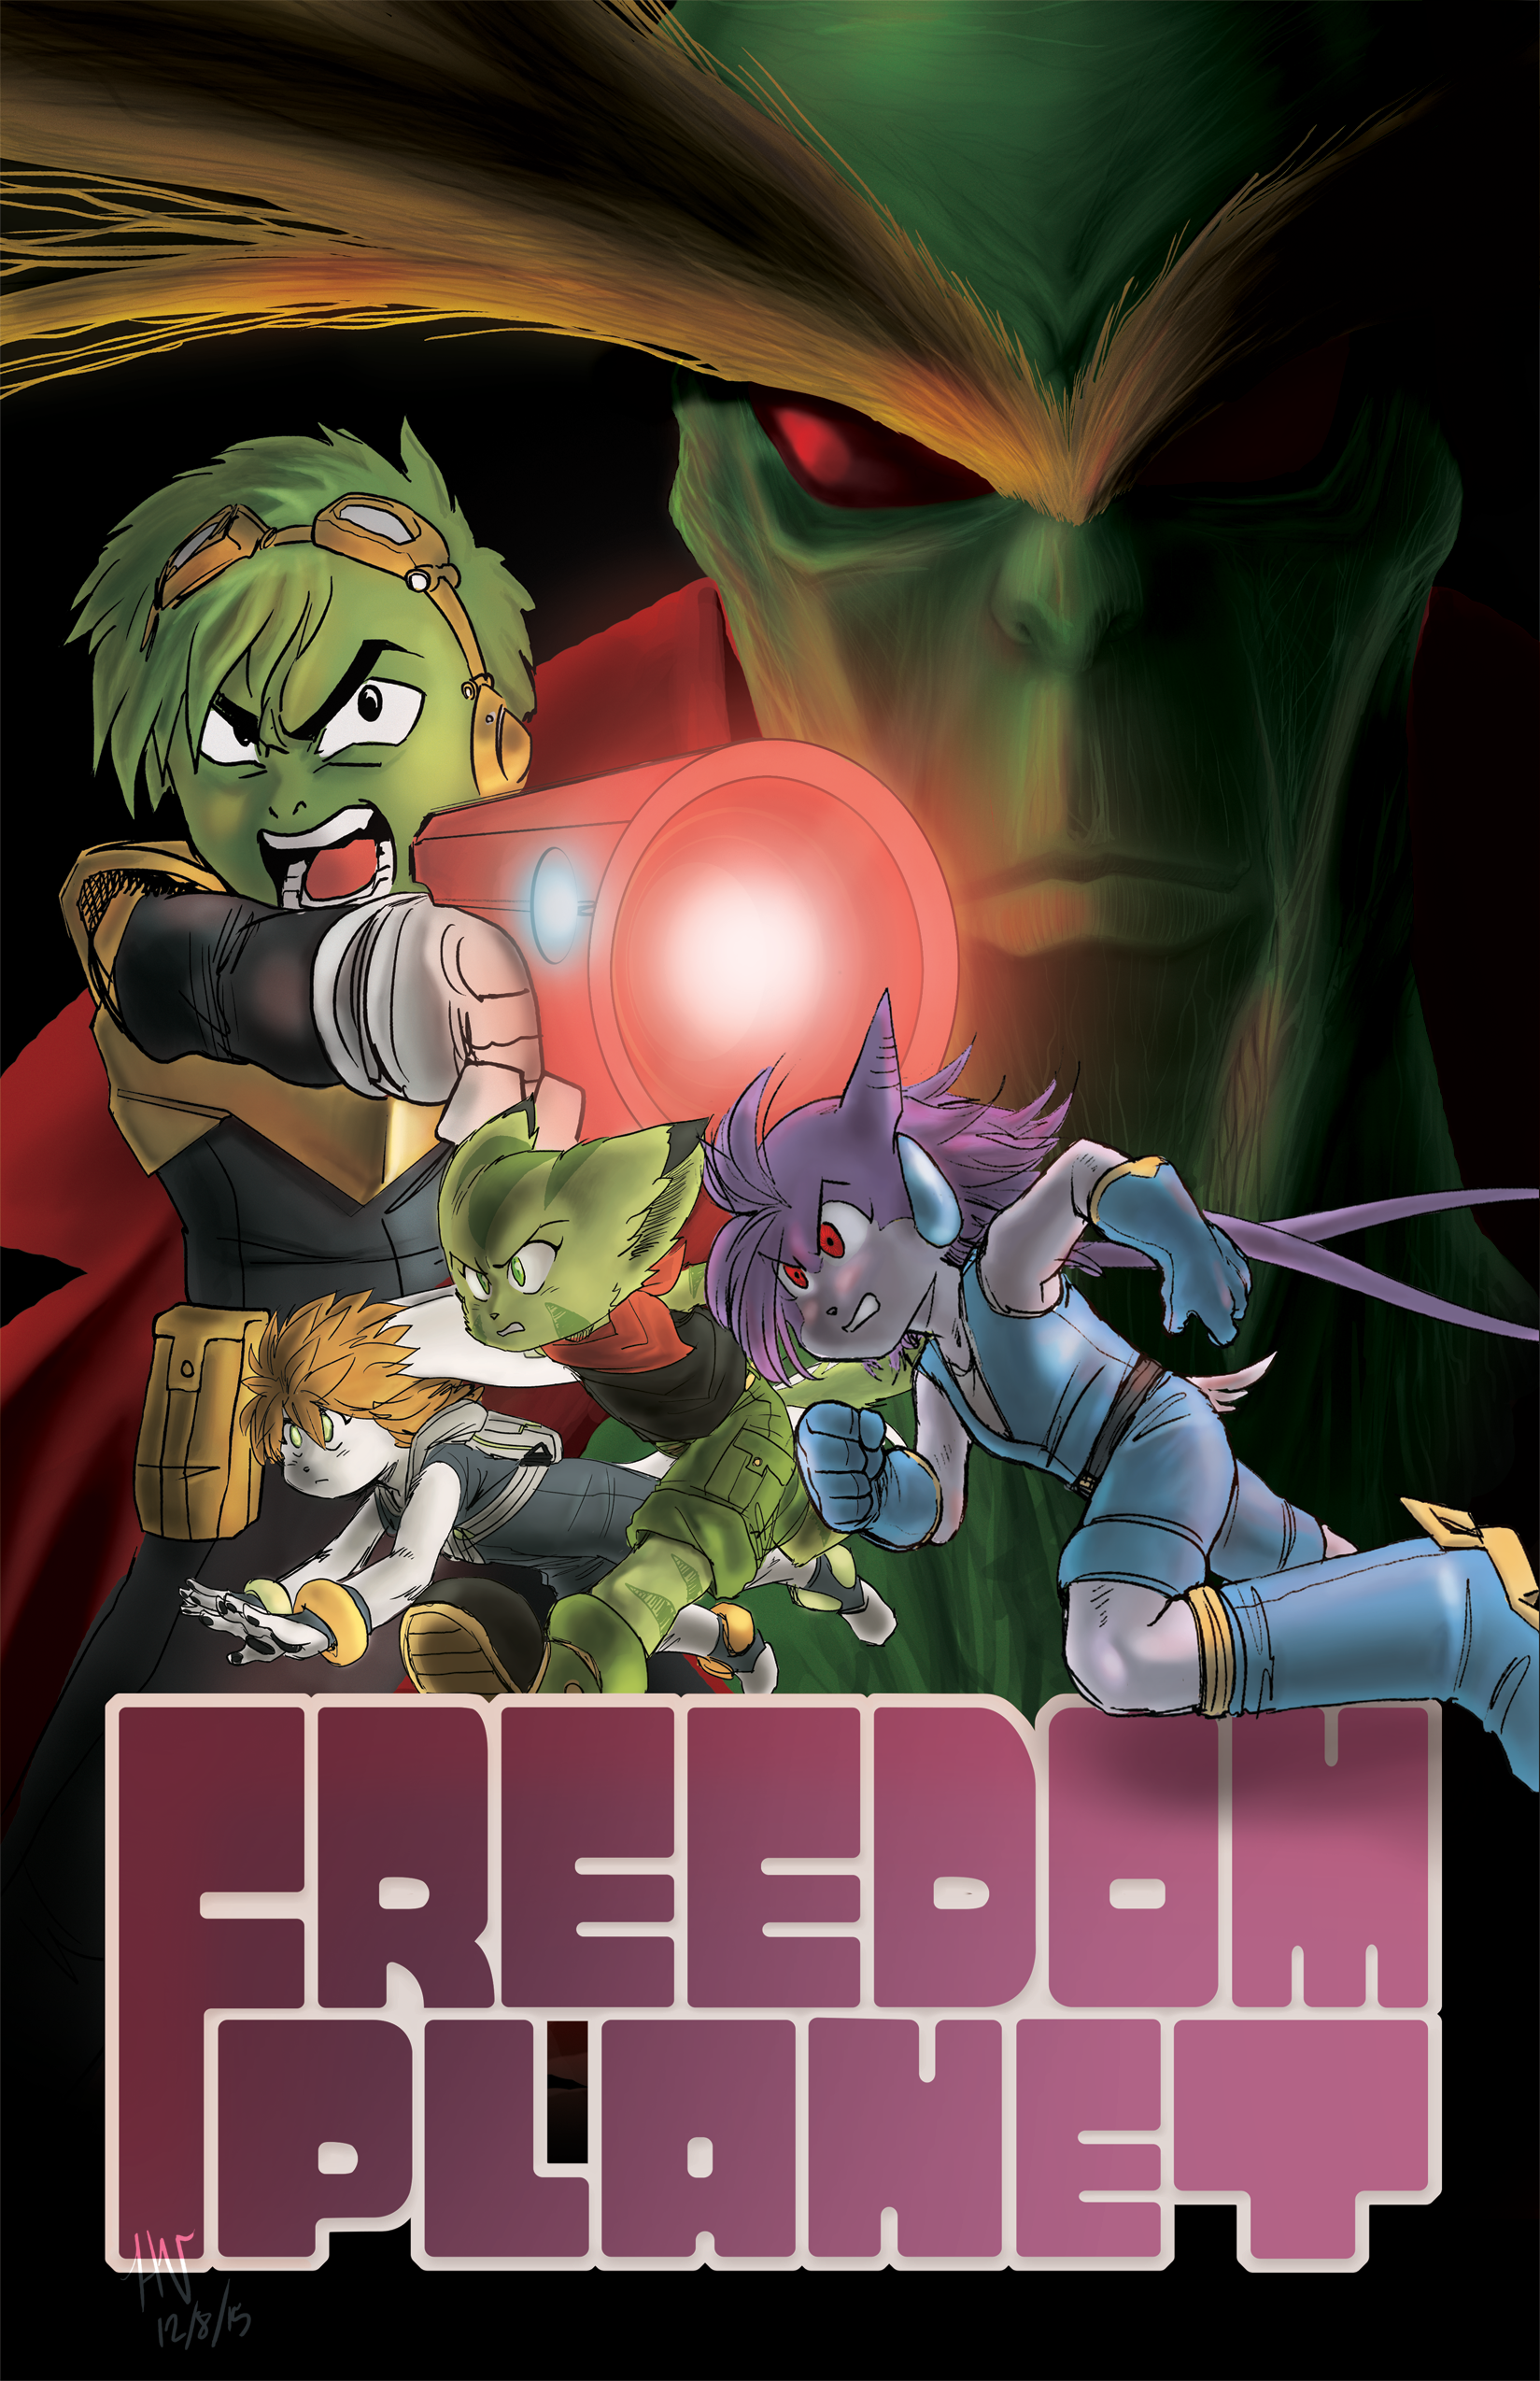 freedom planet 2 steam download